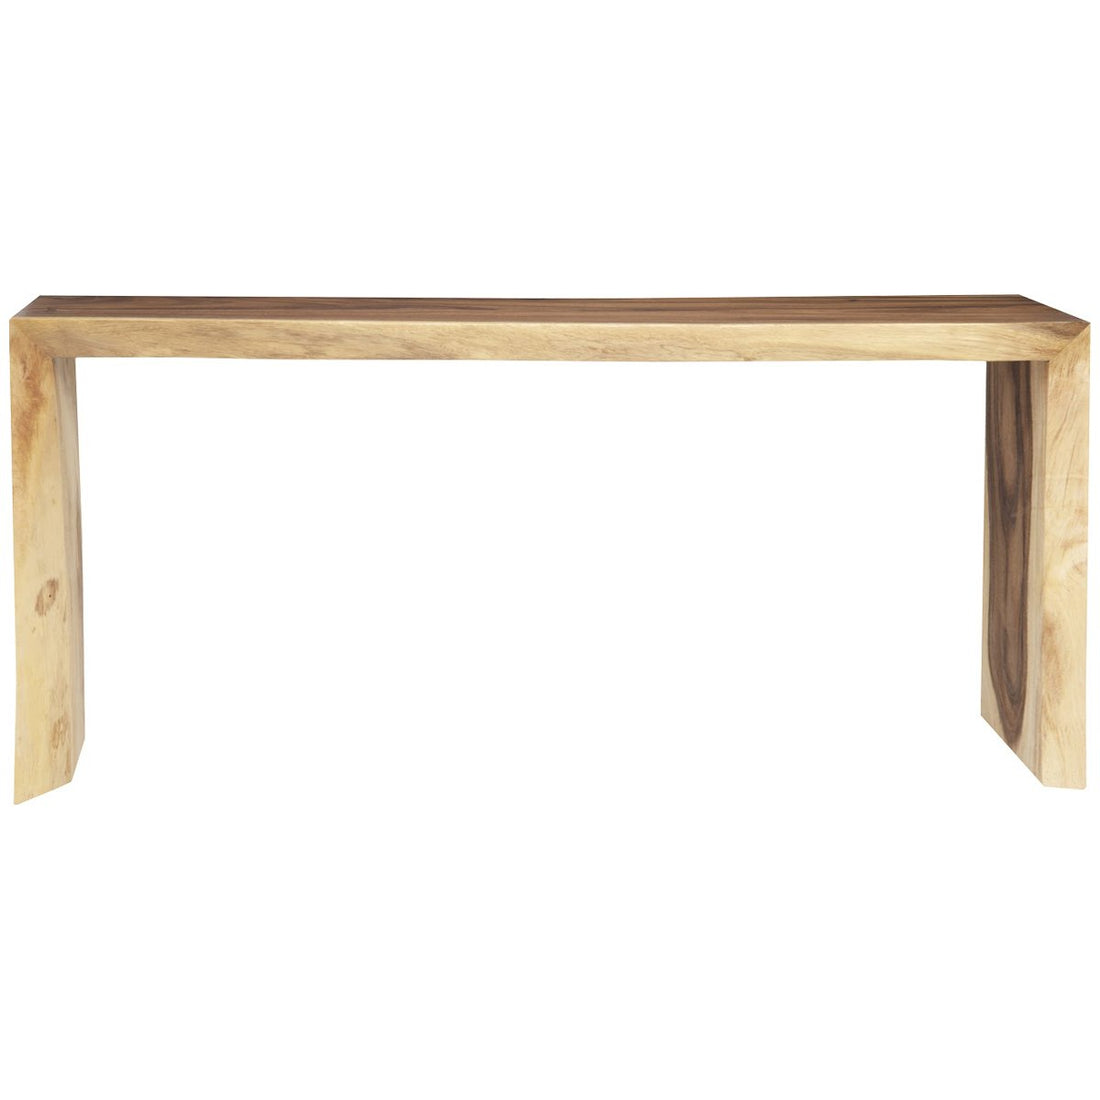 Phillips Collection Waterfall Console Table